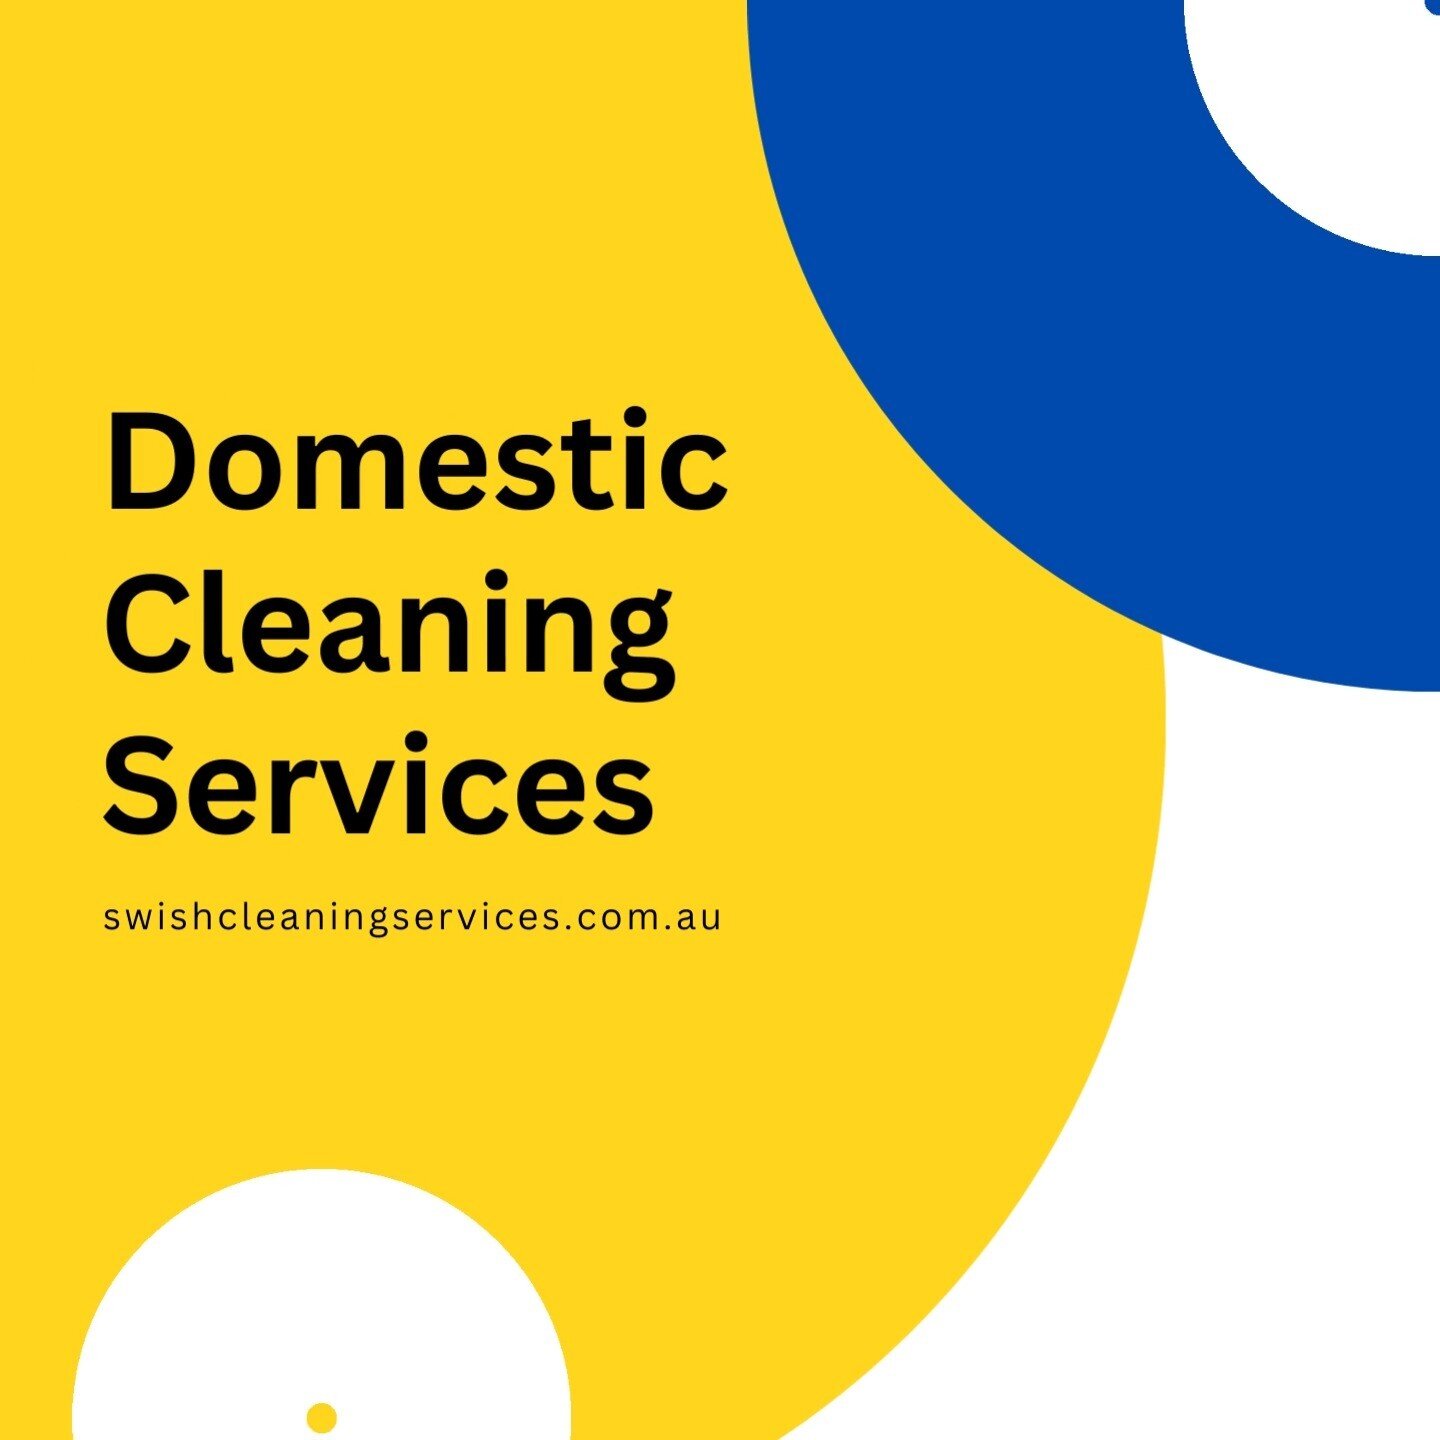 🌟 DOMESTIC CLEANING SERVICES 🌟 

Servicing our local community in the Northern metropolitan region and beyond. 

At Swish Cleaning Services we offer

📅 Regular Cleaning Services
🏡 End of Lease Cleans
🦠 One Off/Deep Cleans
🧽 Specialty Services e